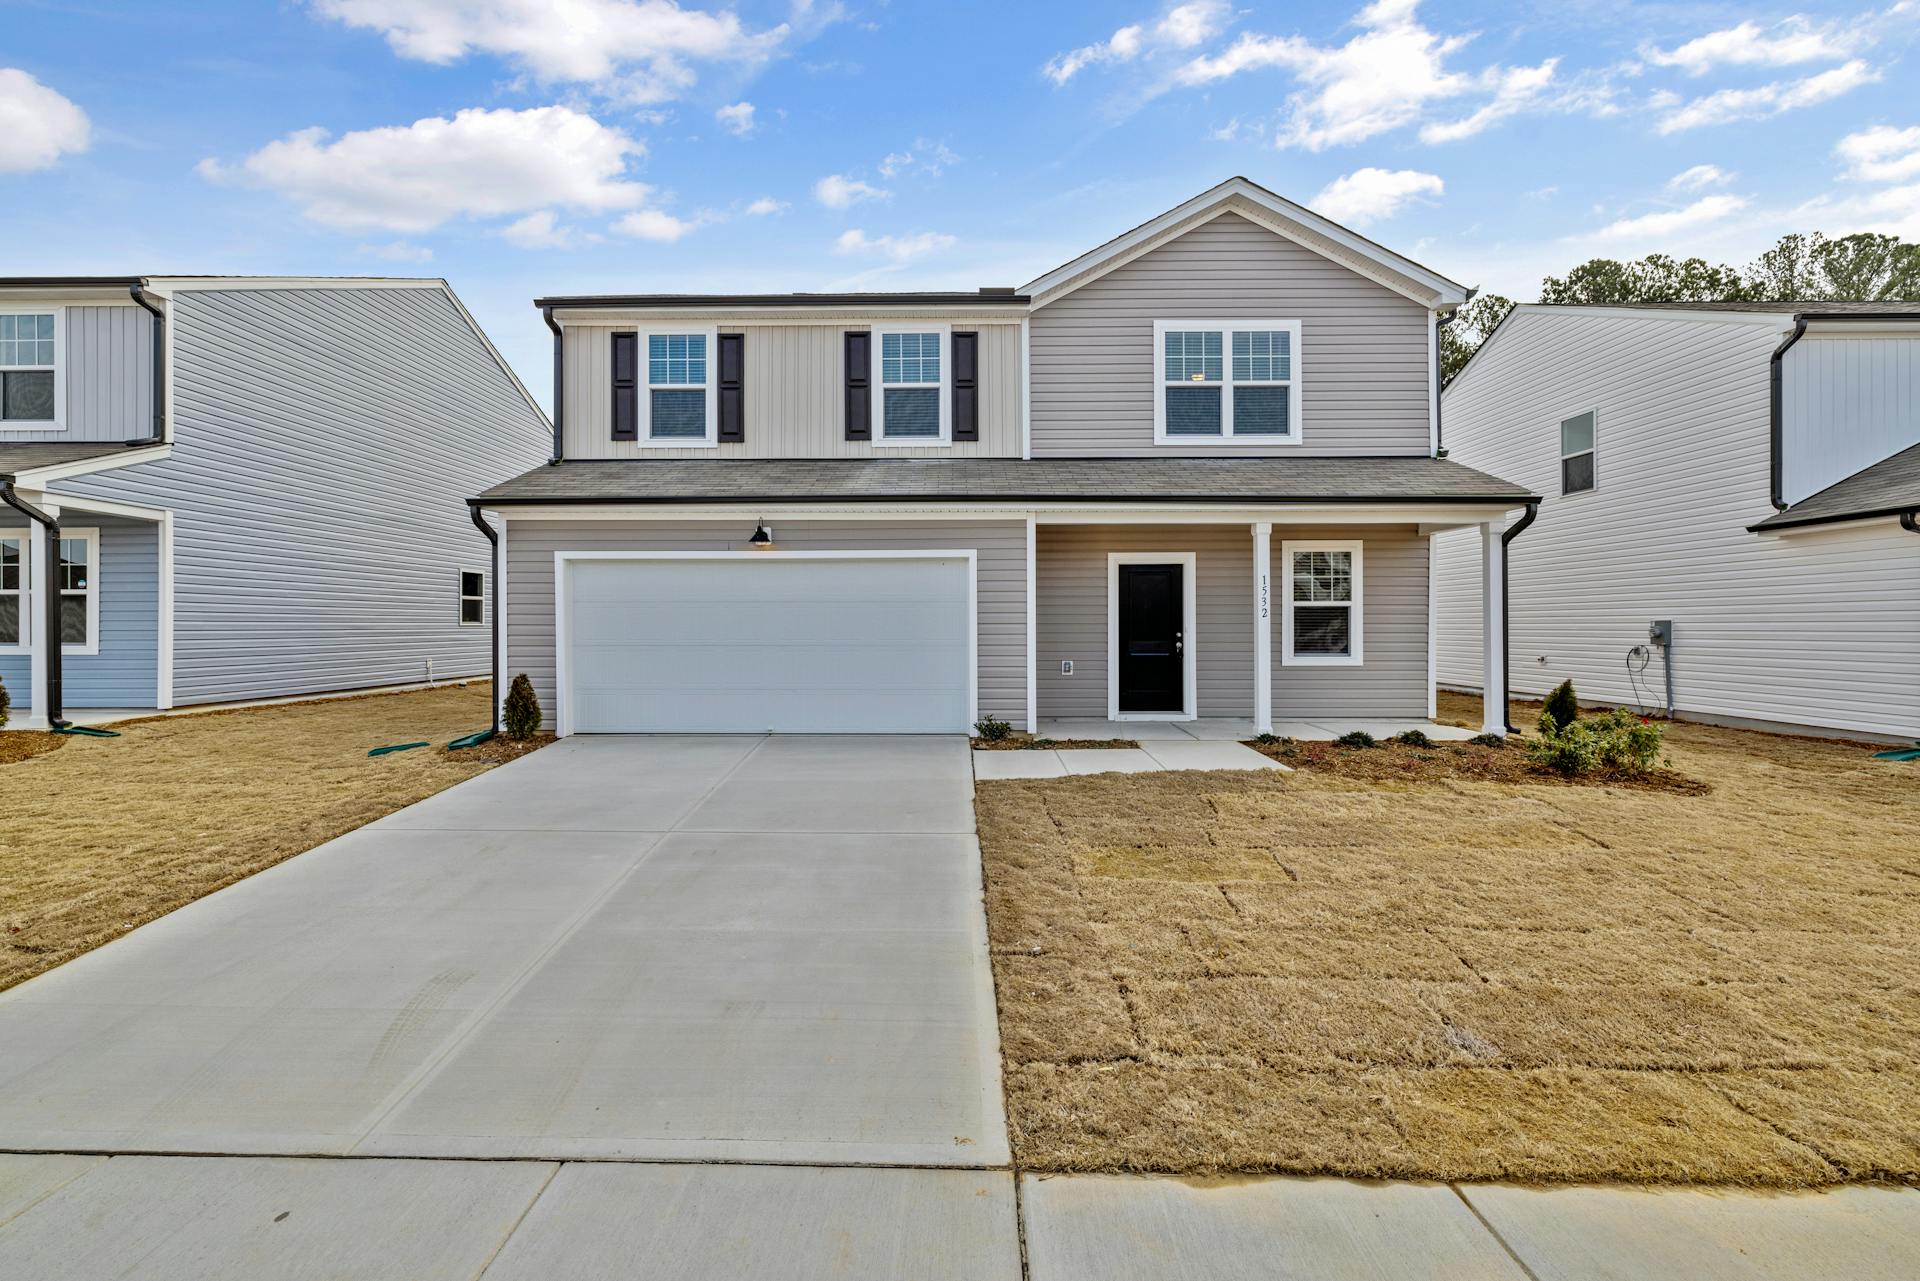 A newly constructed two-story home with light gray vinyl siding and contrasting dark shutters. The house features a large two-car garage, a freshly laid sod lawn, and a welcoming front door, which speaks to the level of professionalism and thoroughness you can expect from a home inspection conducted by Valeri. His services provide homeowners with critical insights and solutions, ensuring their property is primed and polished for potential buyers, as attested by the homeowners' endorsement of his exceptional service and valuable feedback.